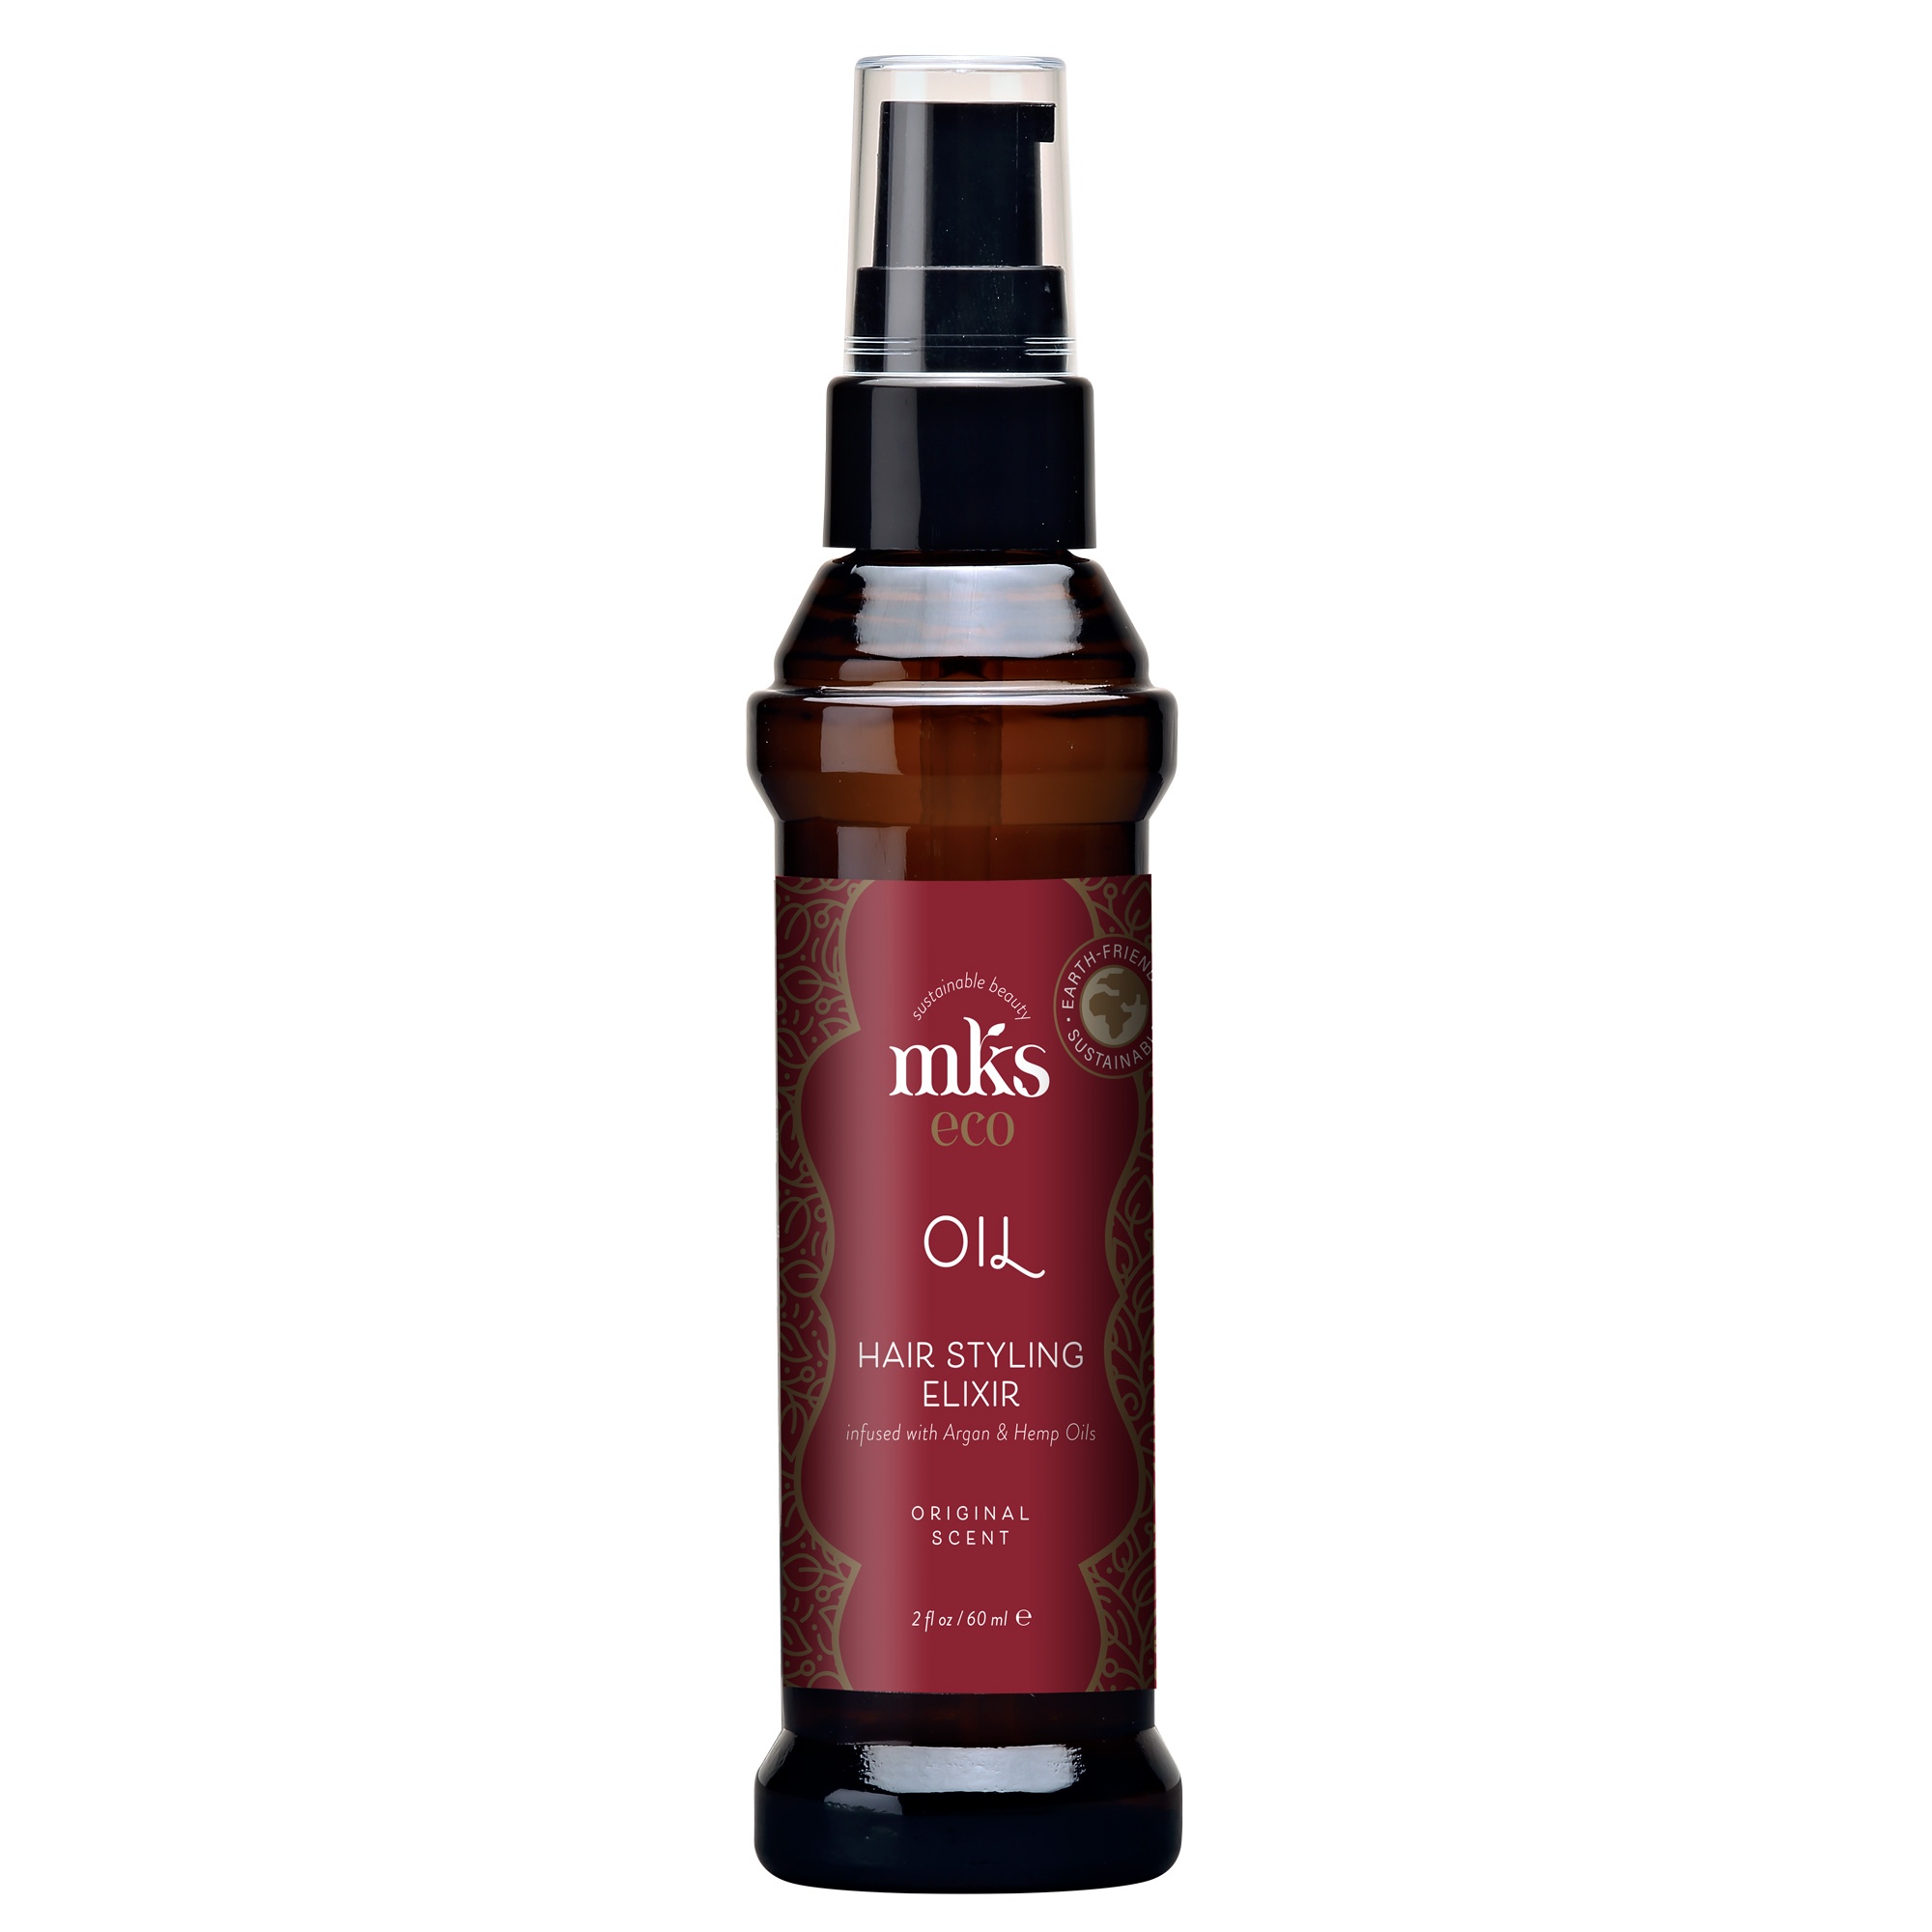 MKS eco Styling: Oil Styling Elixir - Original Scent